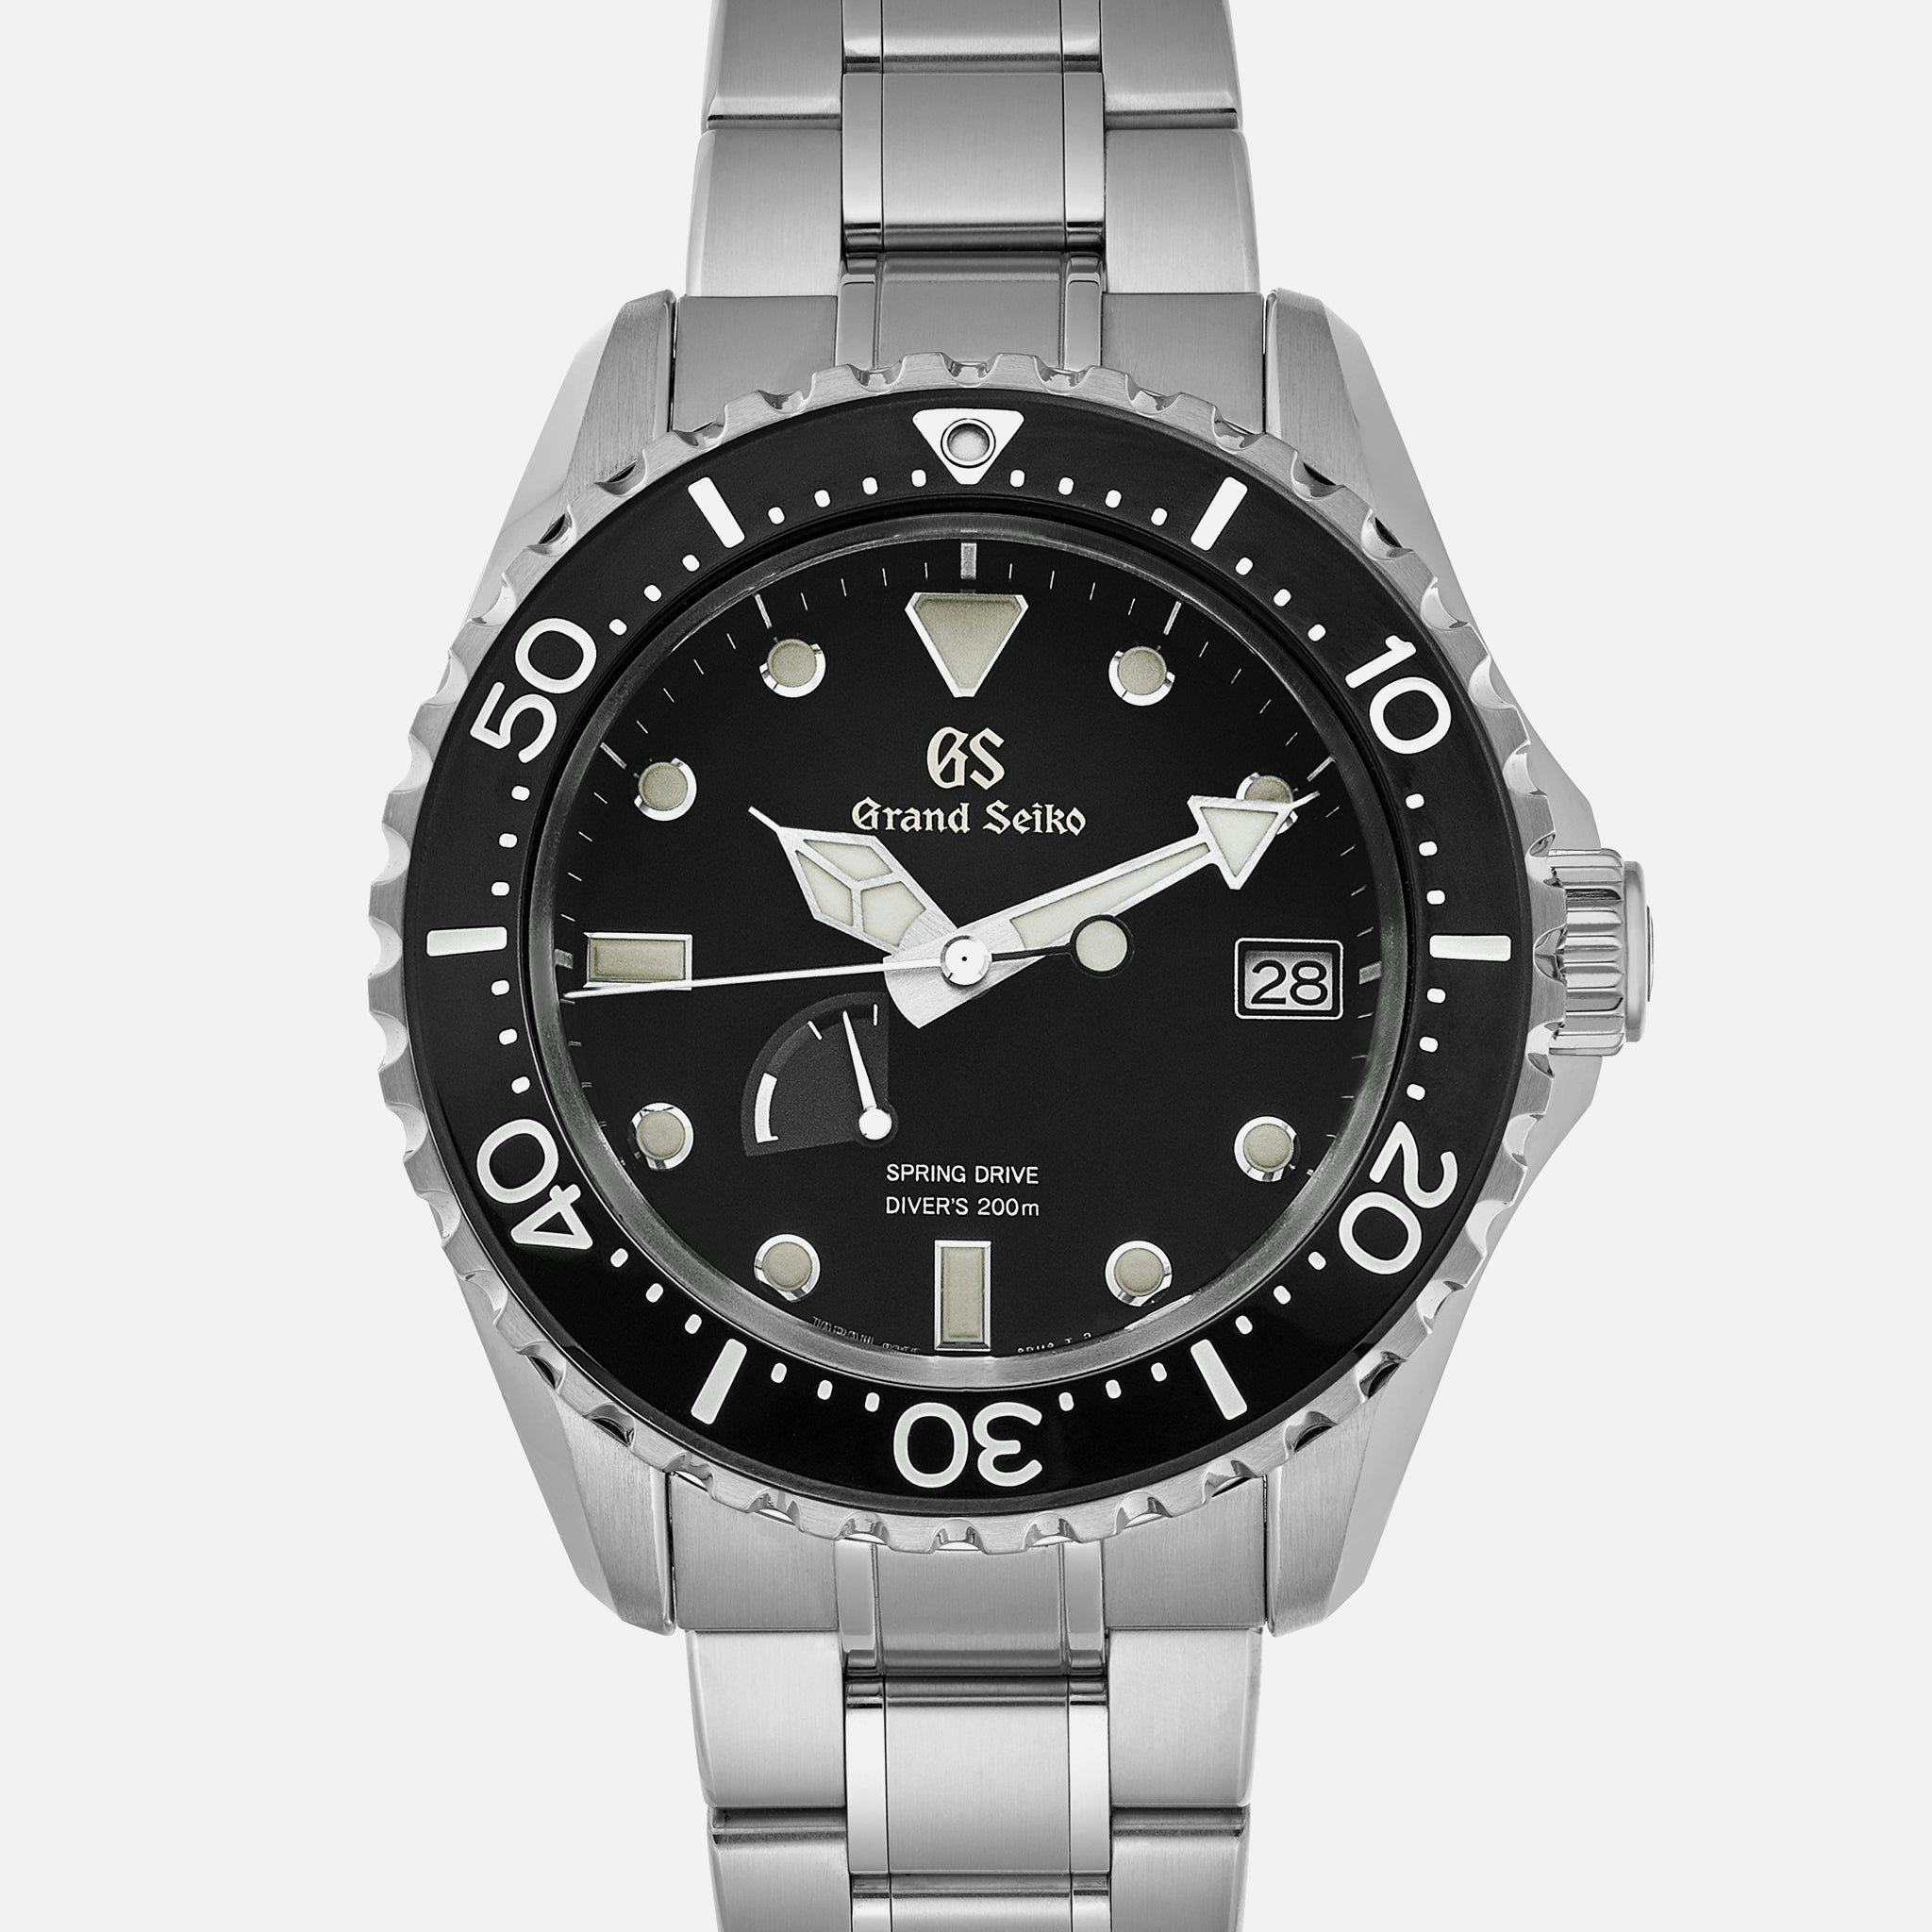 Grand Seiko's Dive Watches Are The Perfect Size